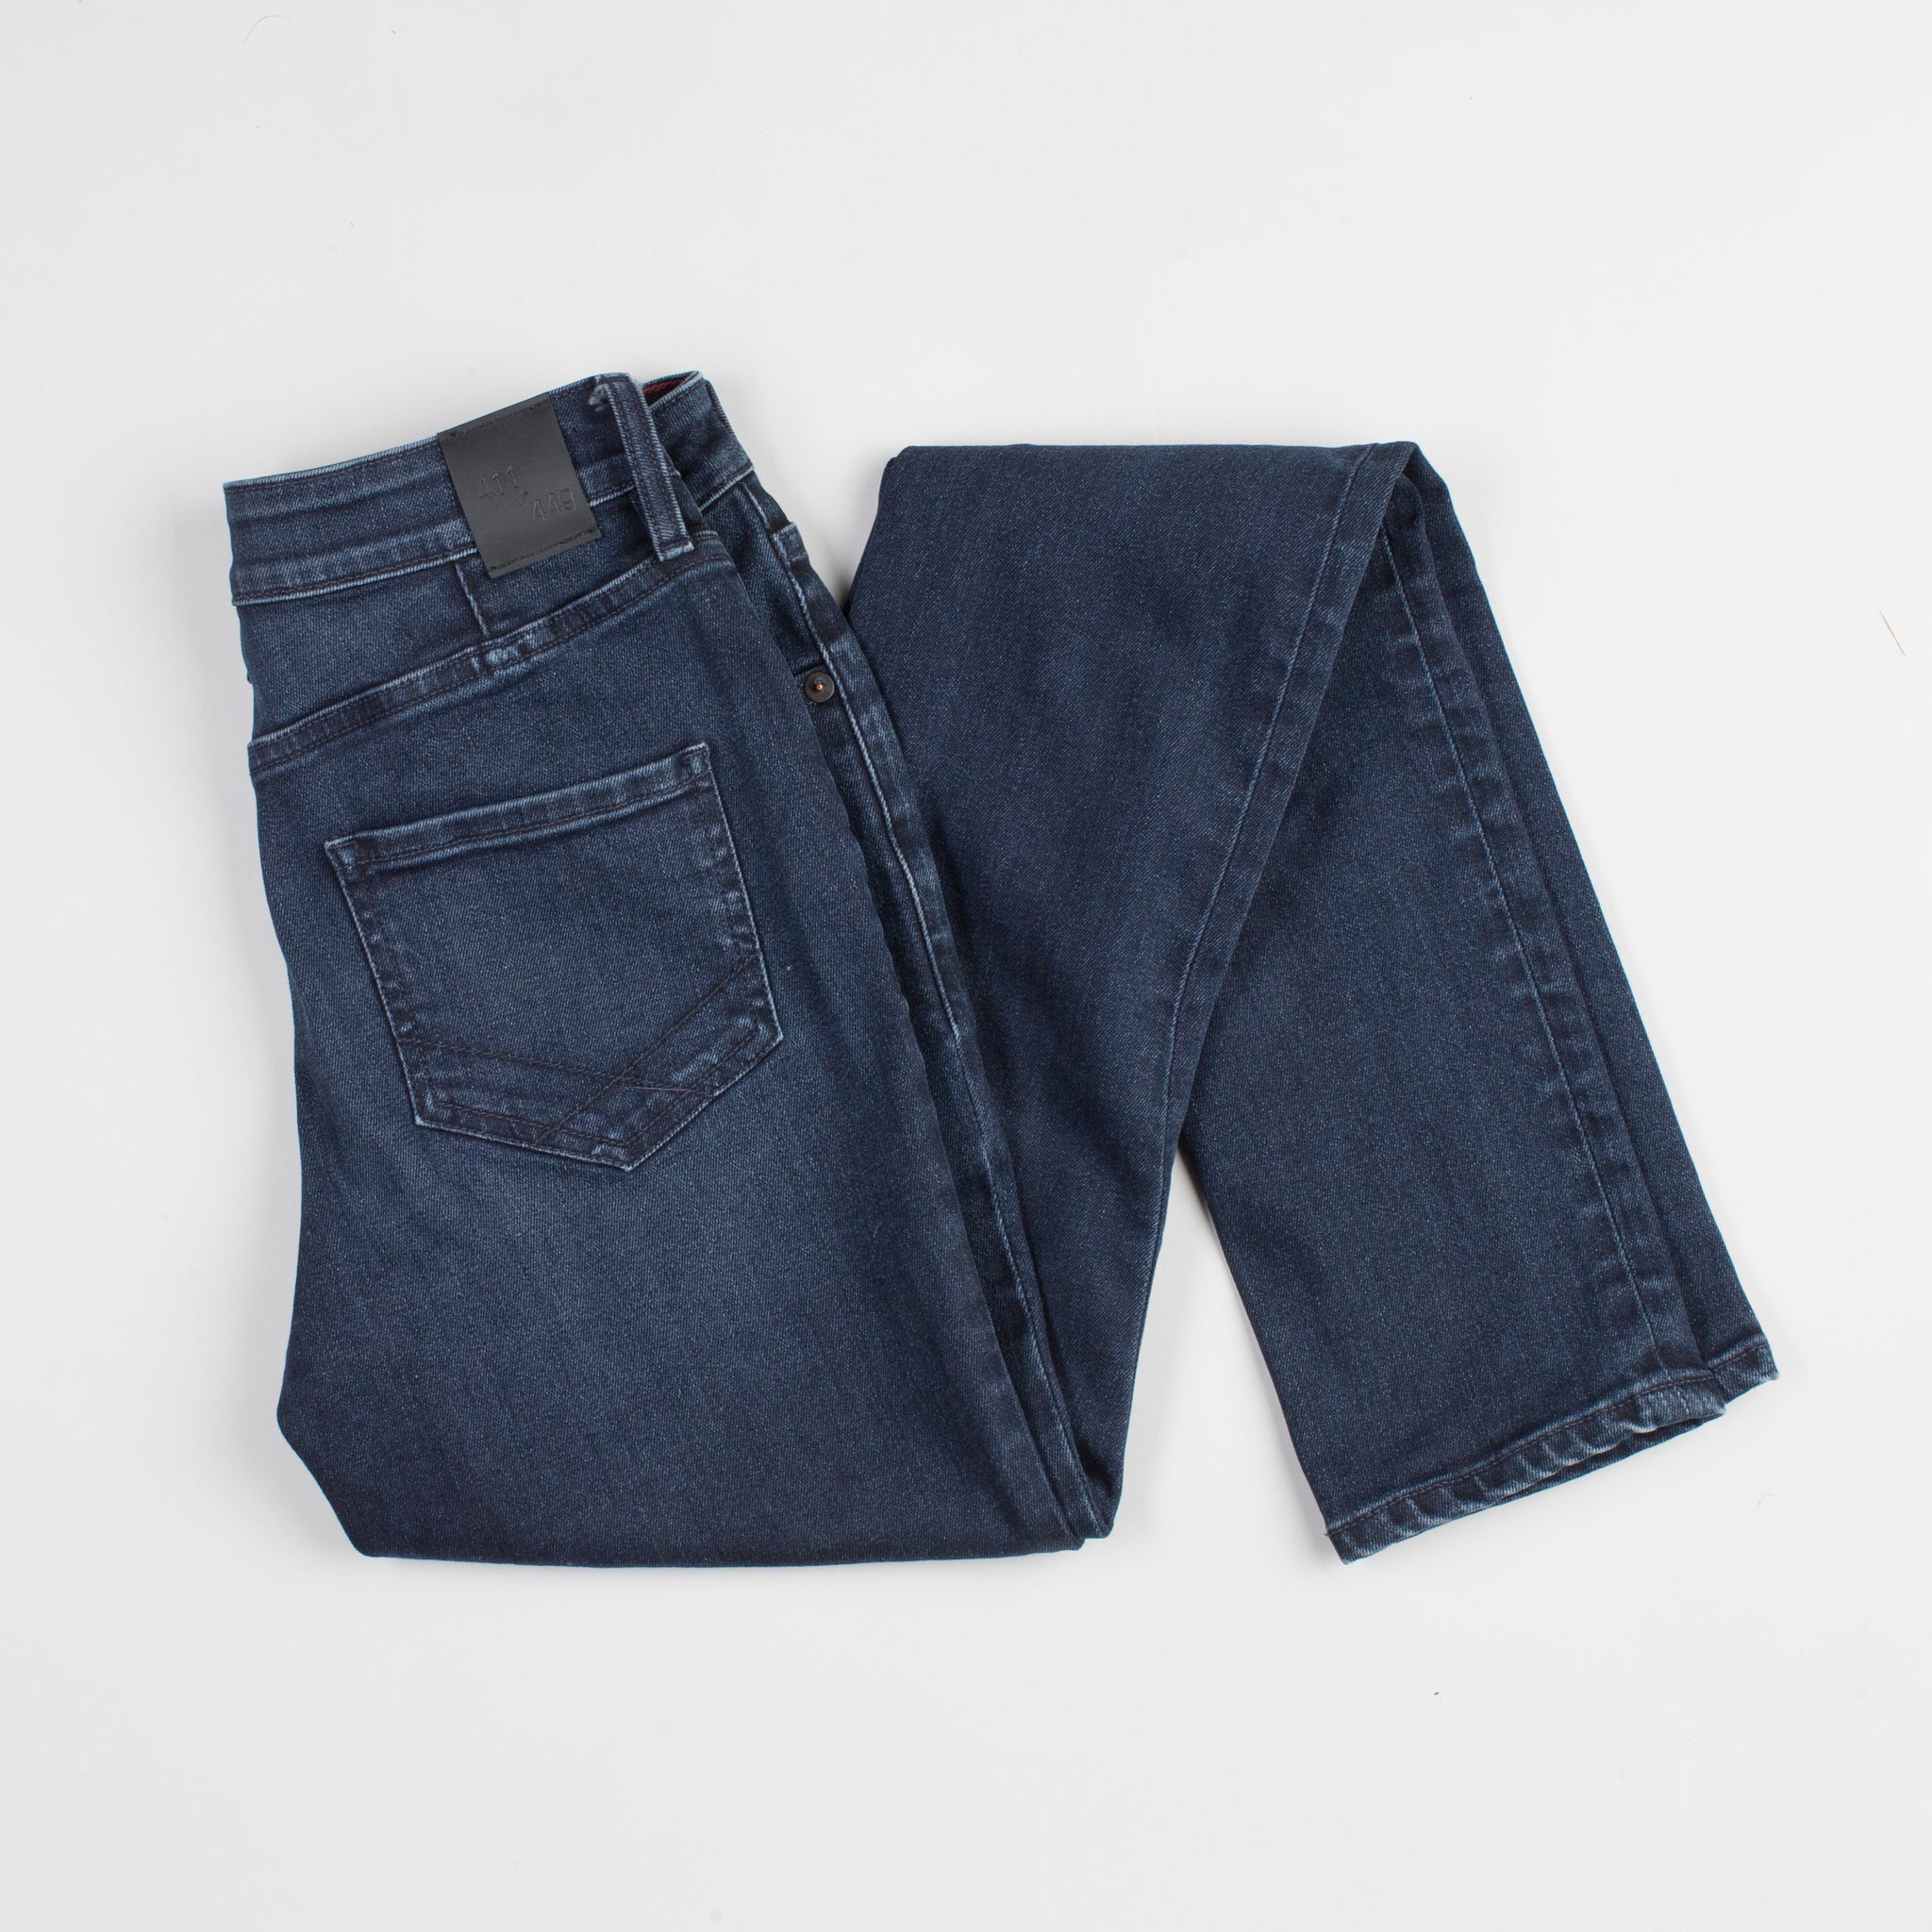 angle: canon  Raleigh Denim Workshop Haywood high-rise skinny jeans with a dark wash, back view